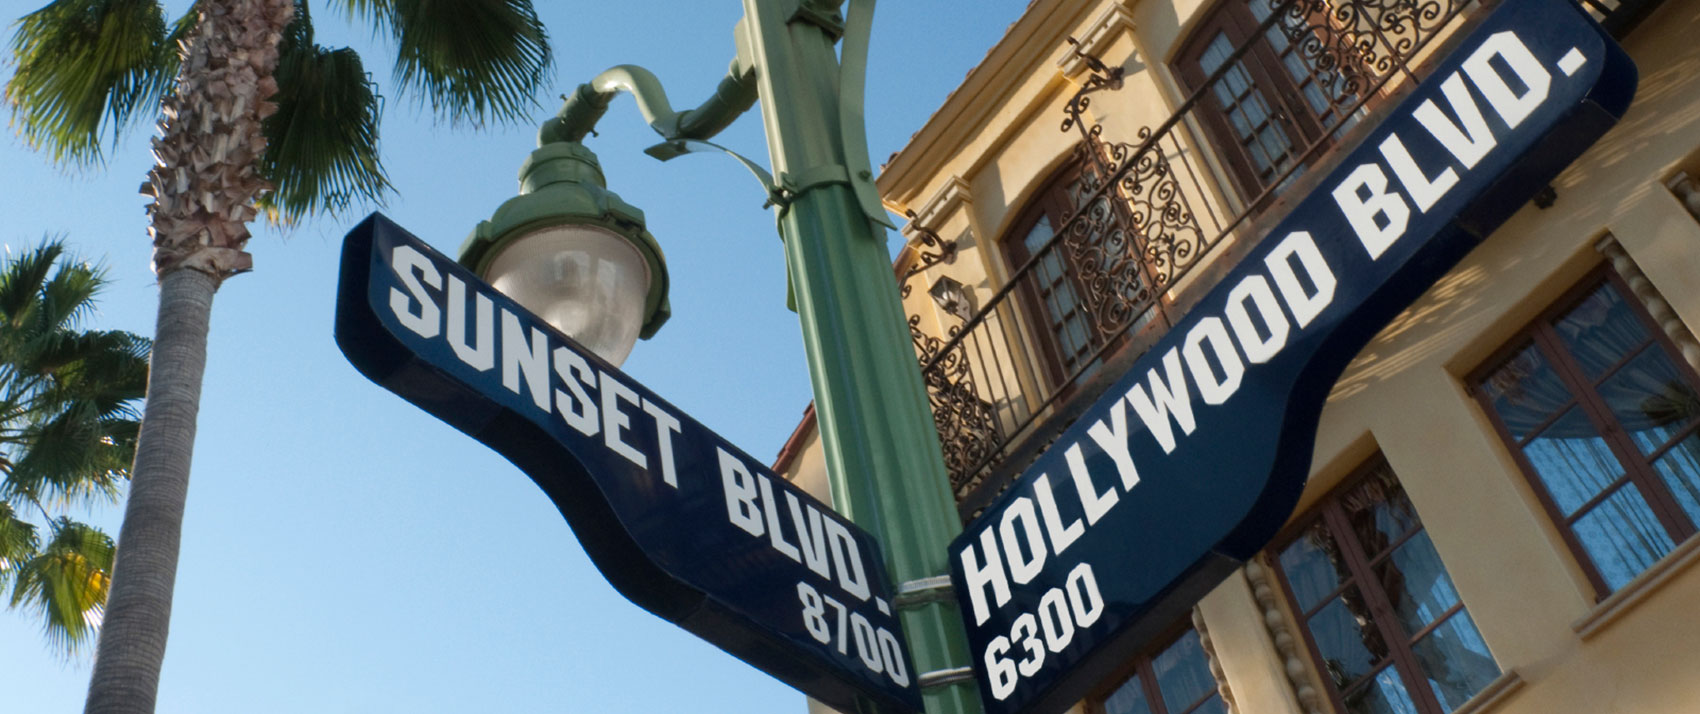 sunset and hollywood street sign